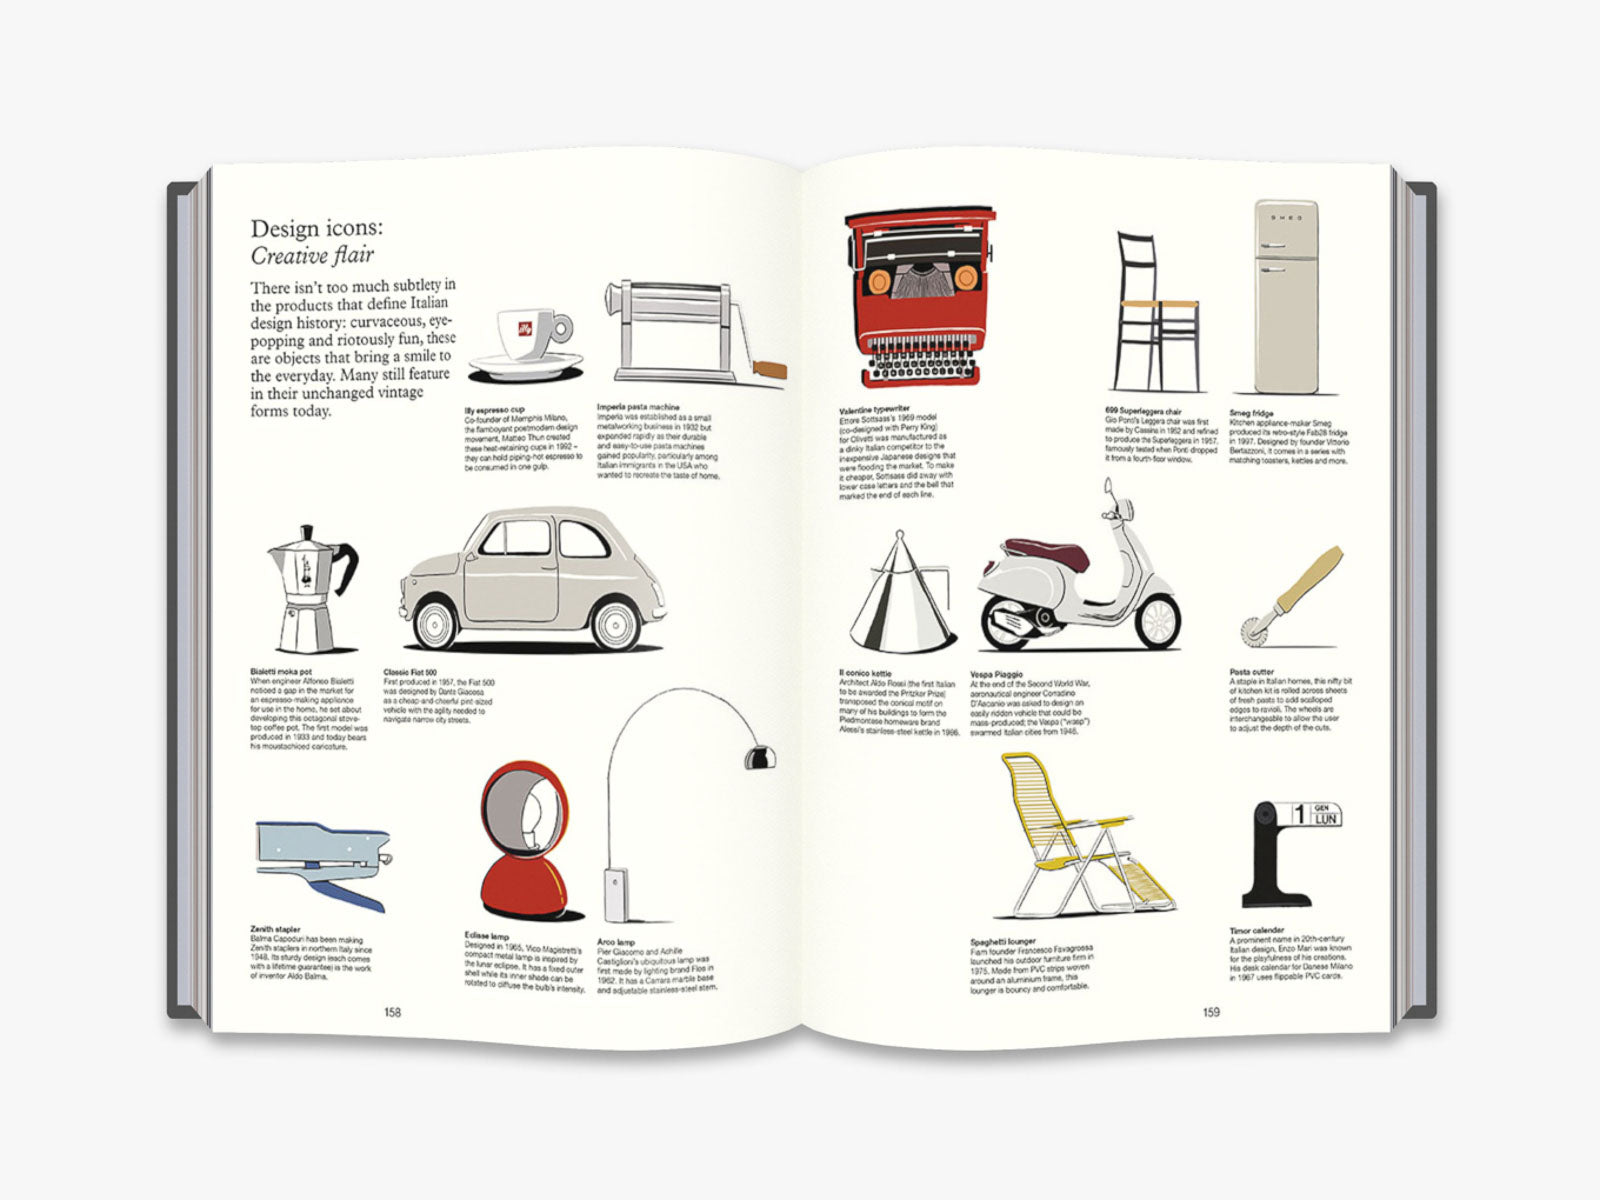 The Monocle Book Of Italy